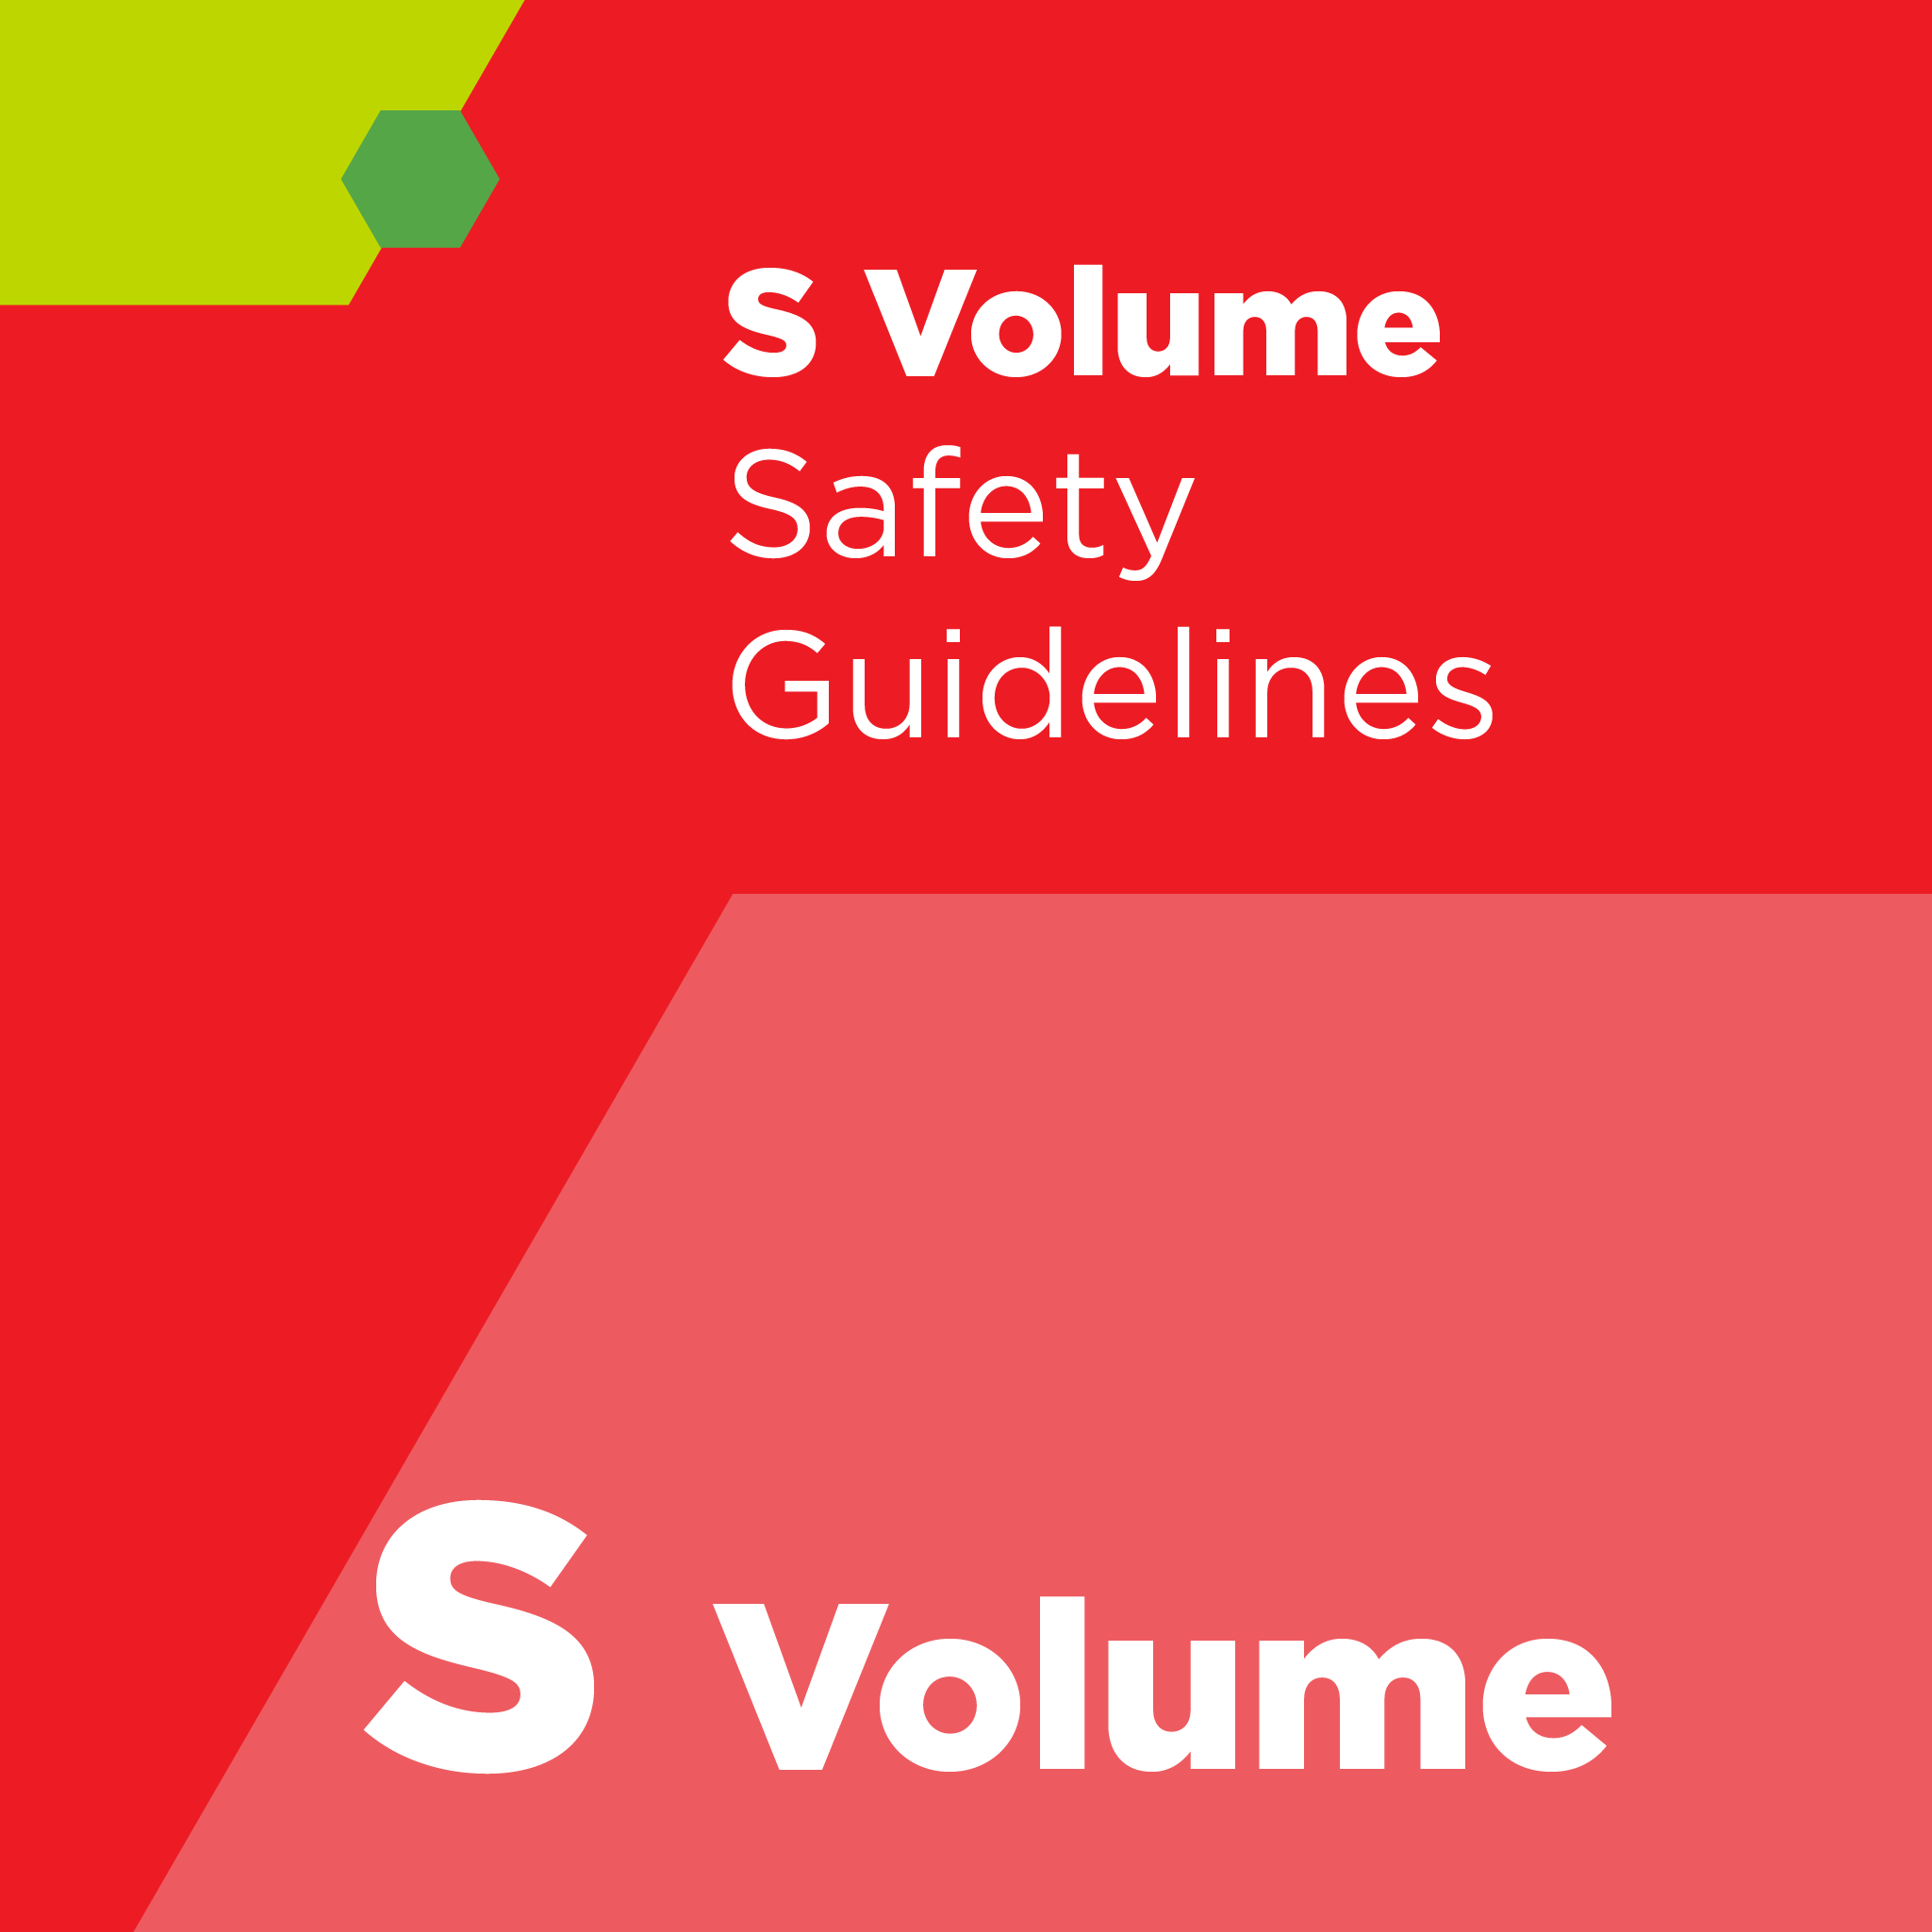 S02200 - SEMI S22 - Safety Guideline for the Electrical Design of Semiconductor Manufacturing Equipment